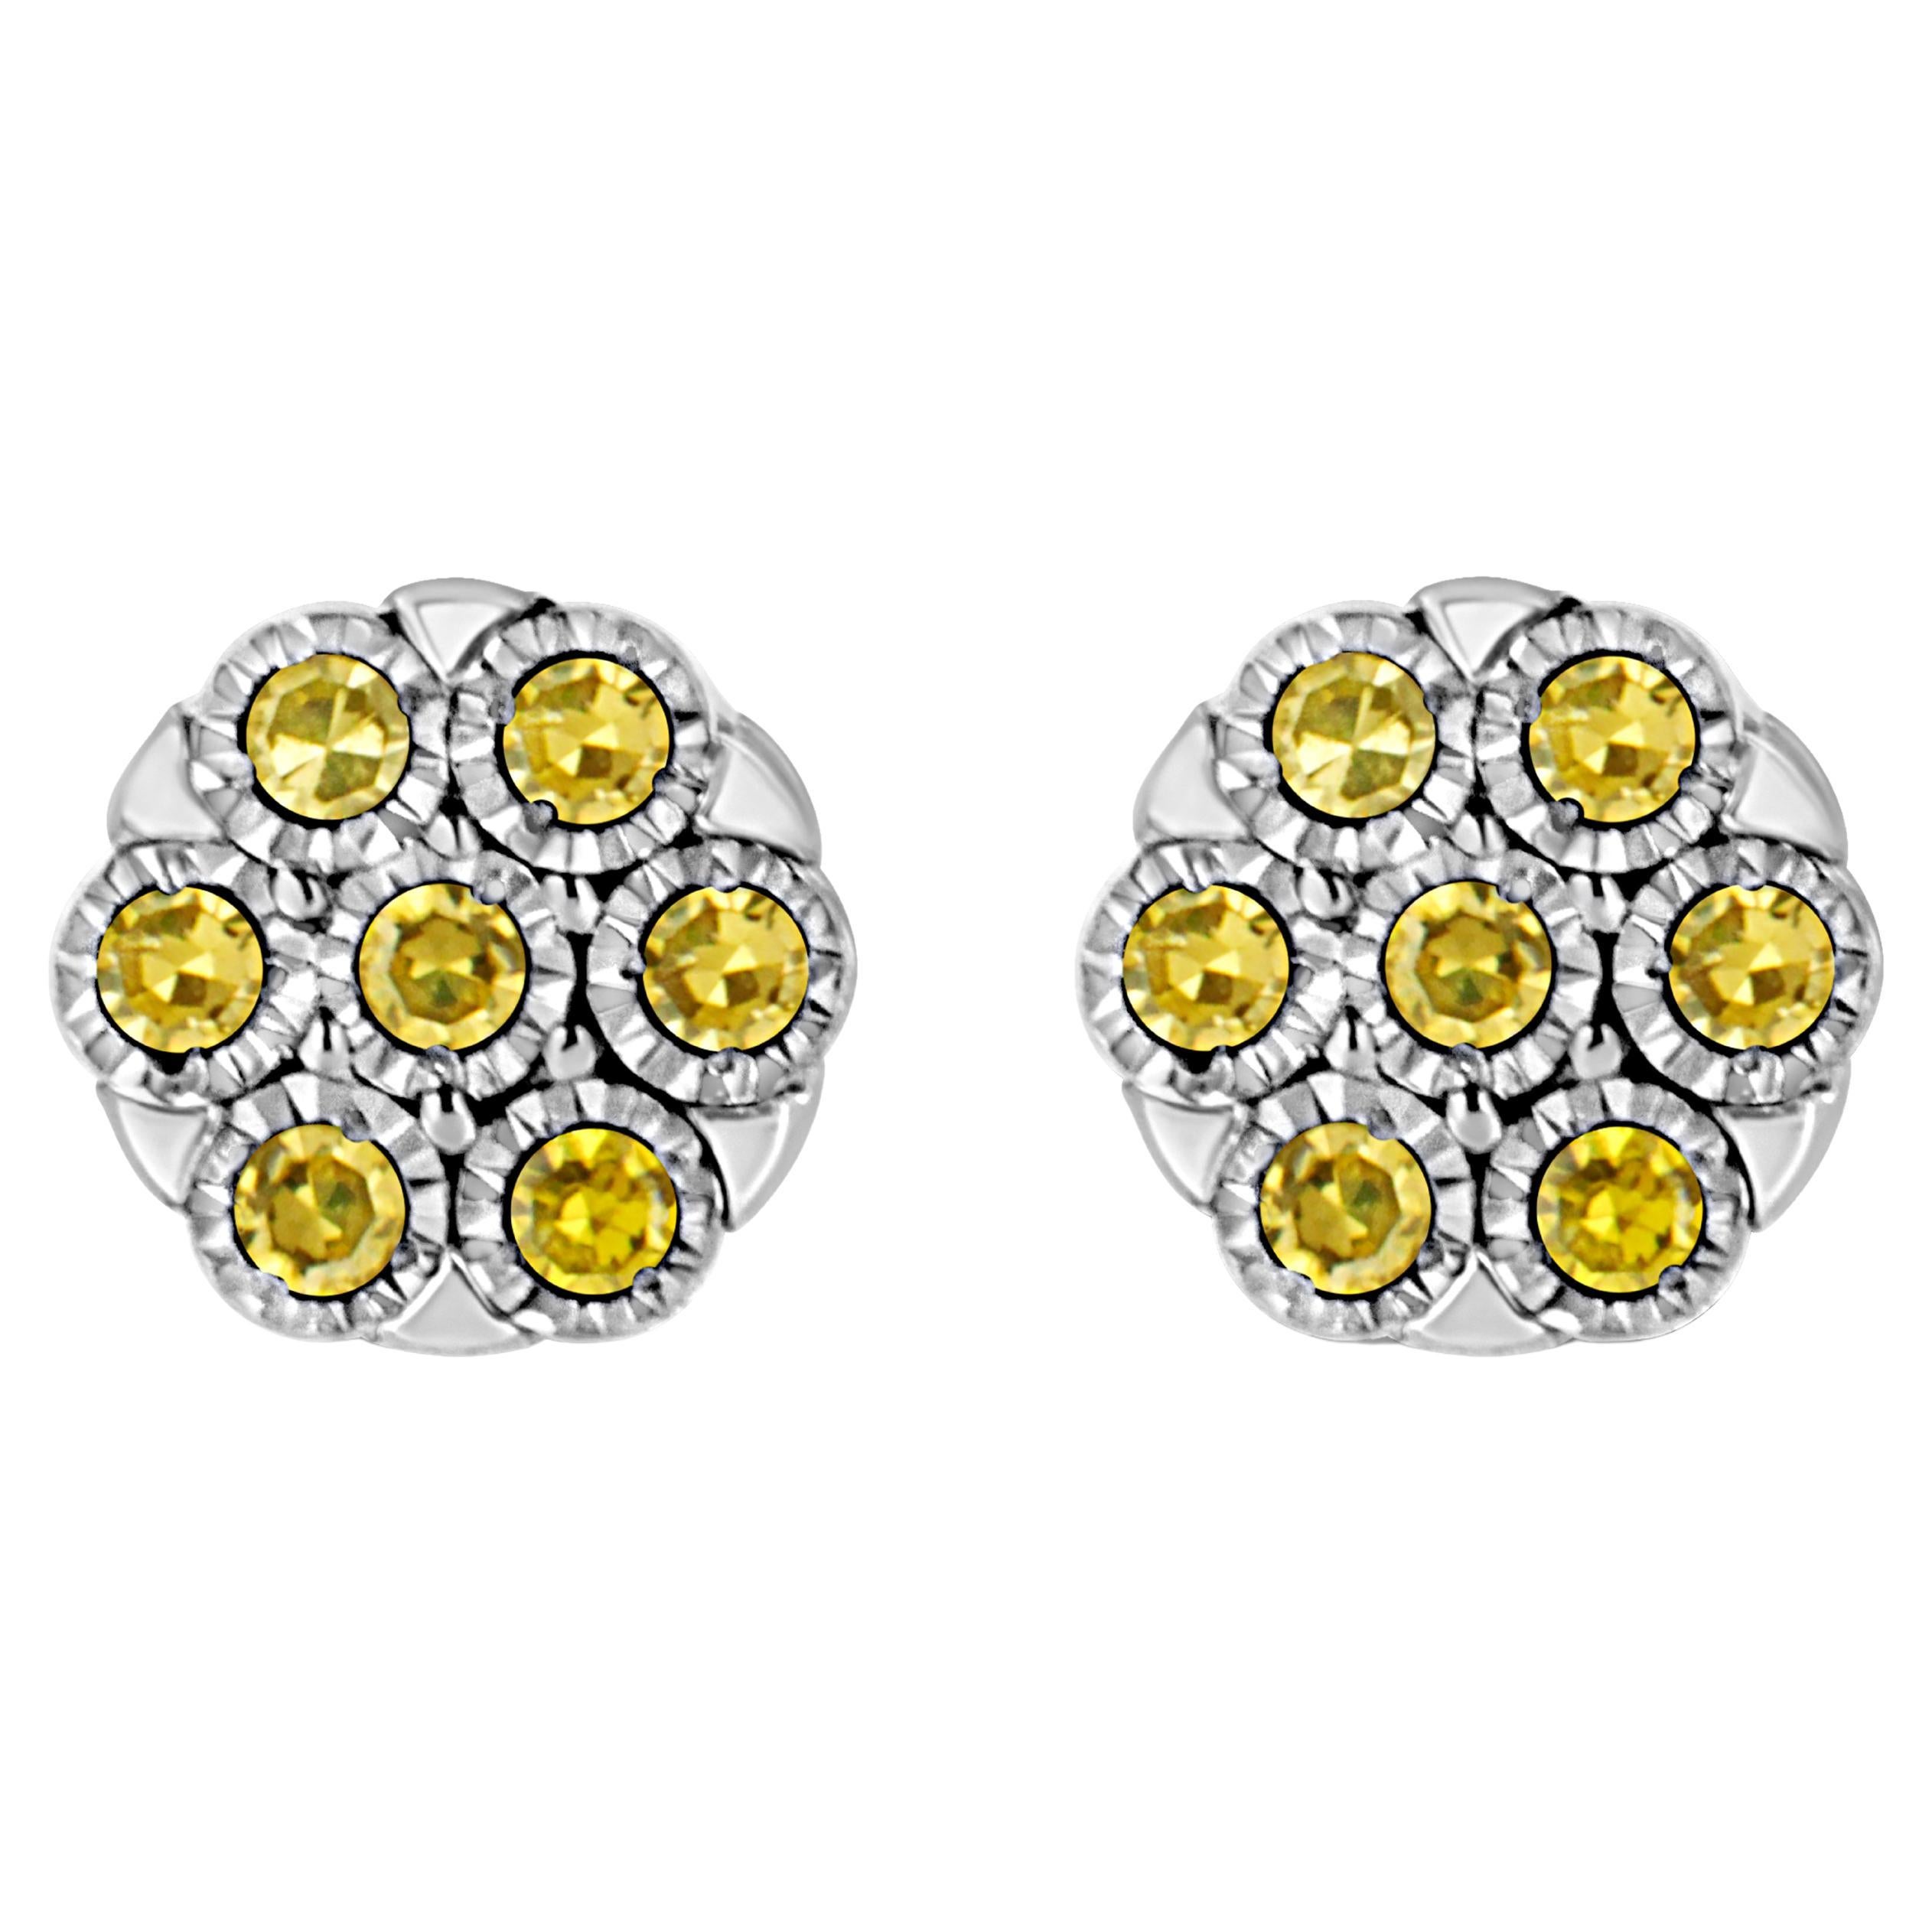 .925 Sterling Silver 1/4 Carat Yellow Color Treated Diamond Flower Earrings